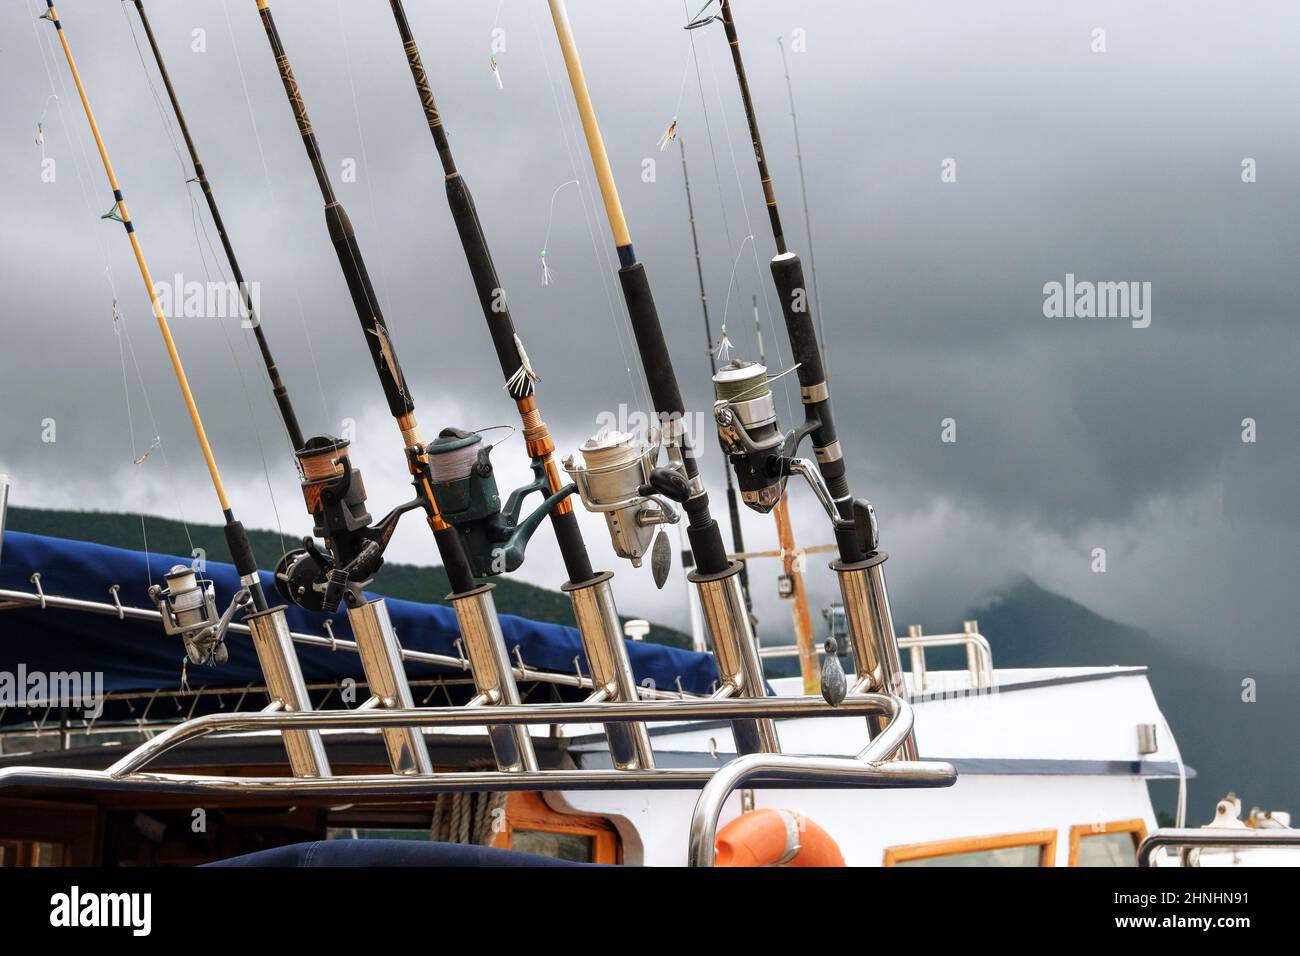 Commercial fishing rods over turquoise water. Fishing equipment on seacoast. Activity of catching fish, either for food or as a sport. Stock Photo